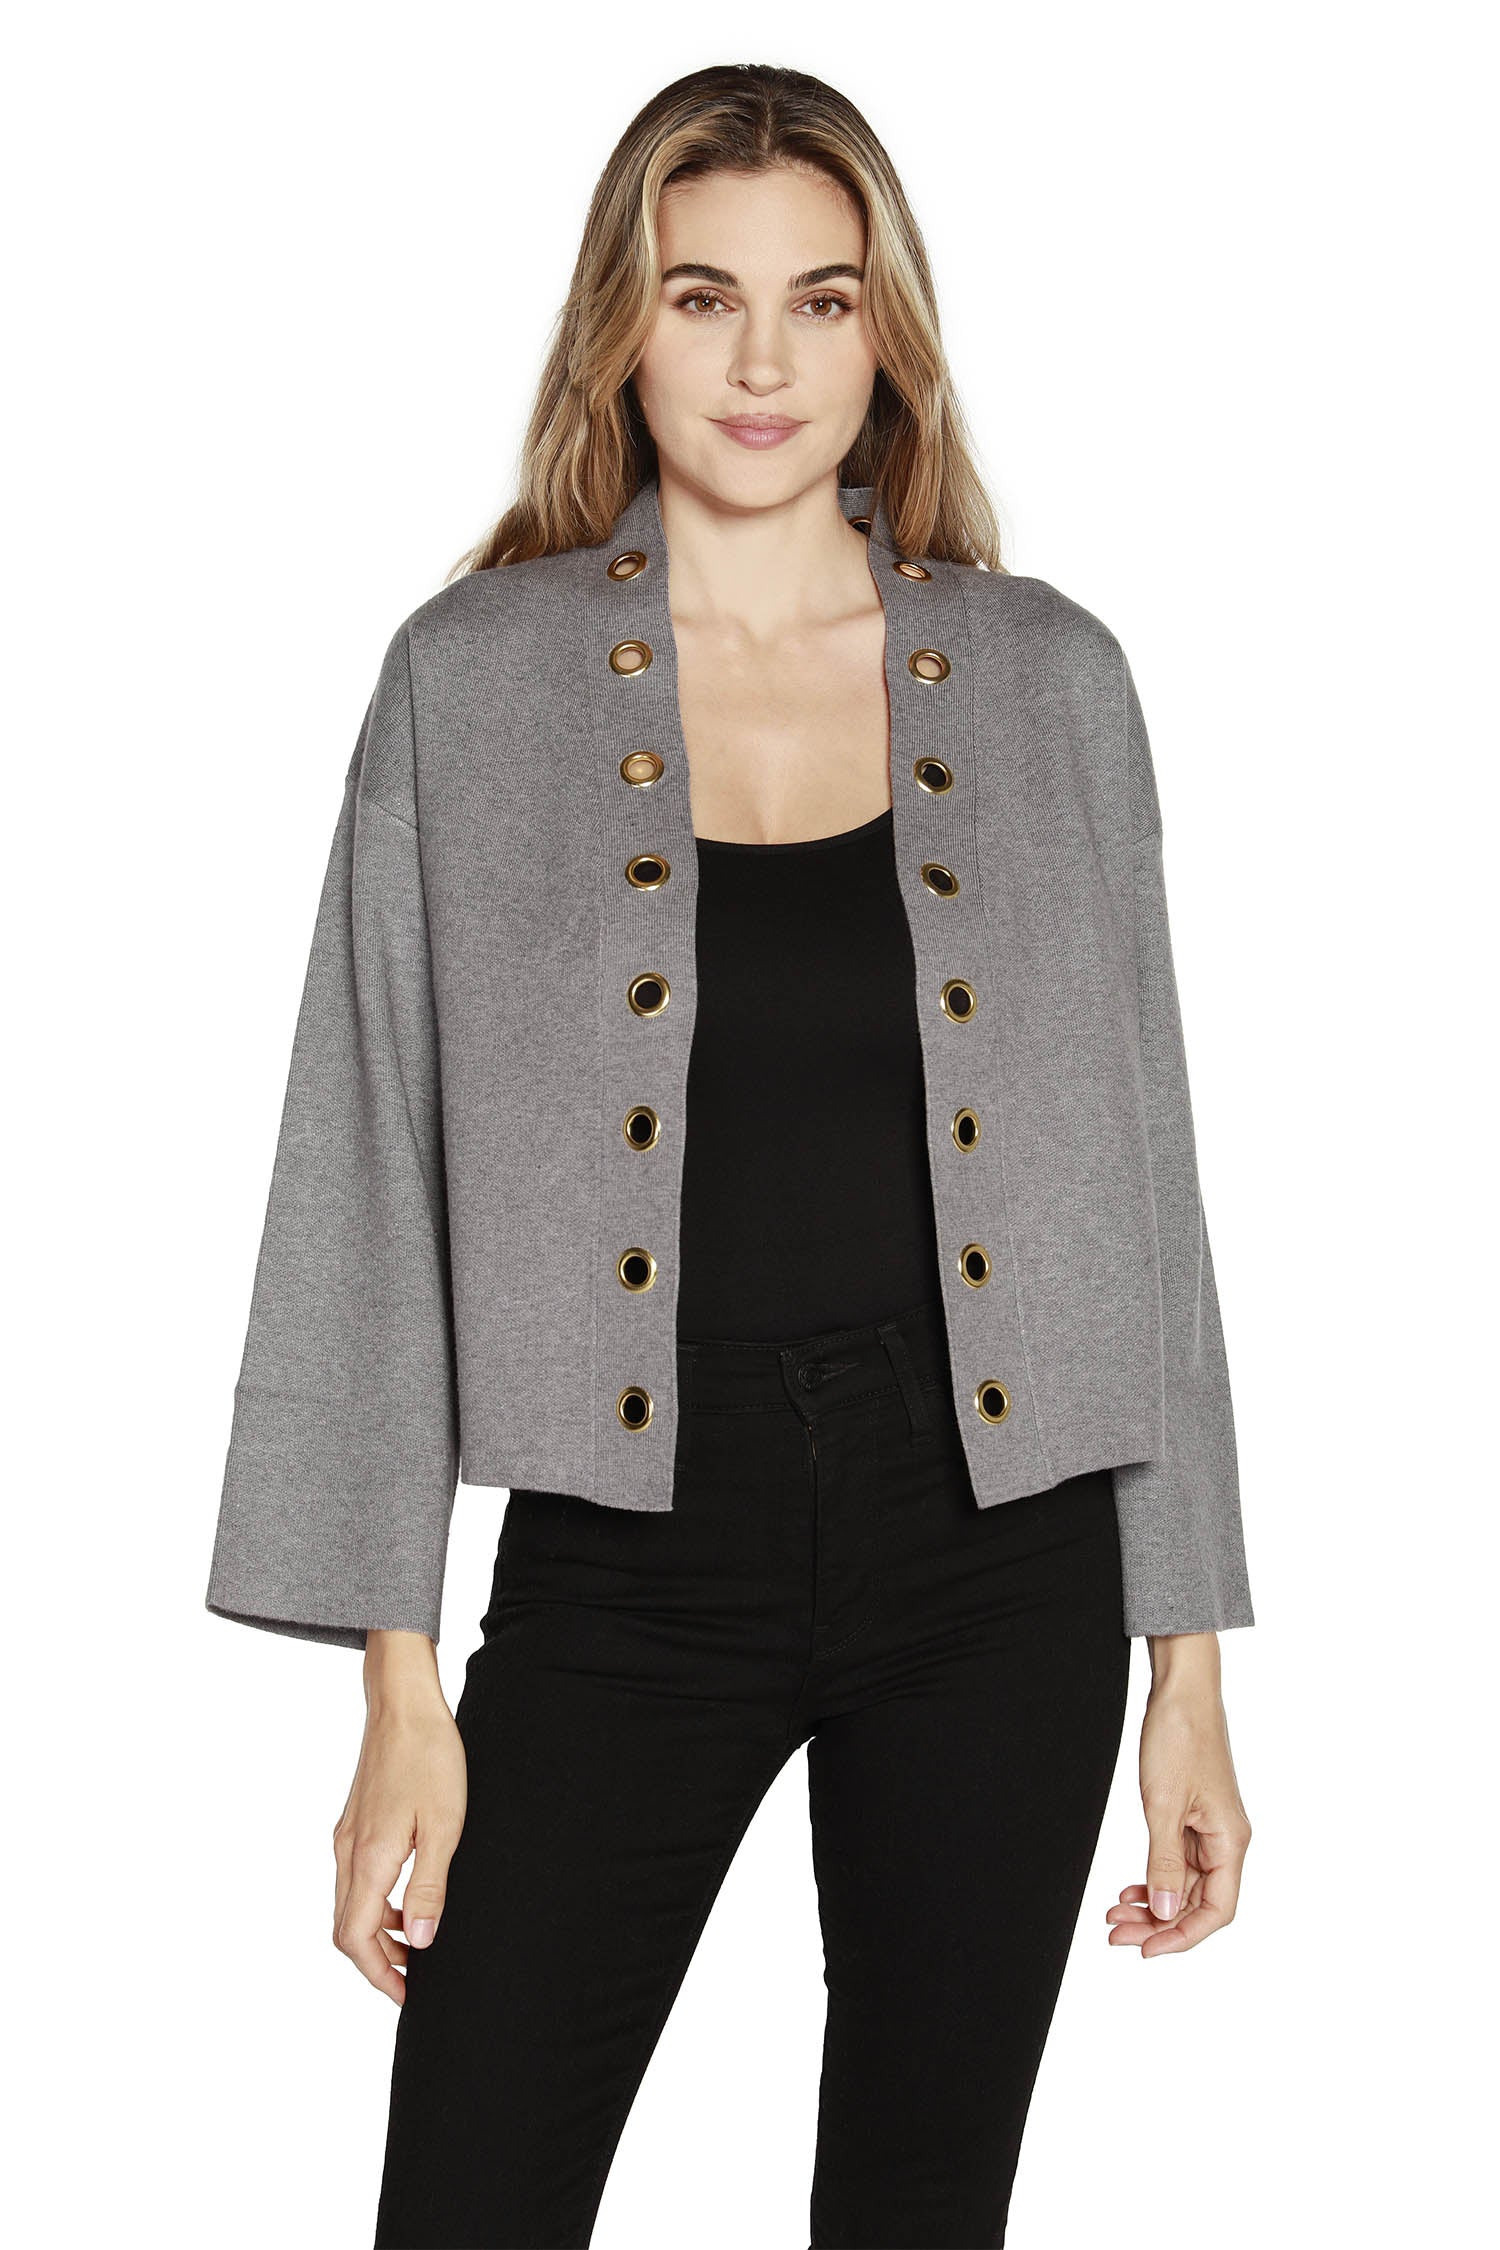 Women's Boxy Cardigan Sweater with Gold Grommet Detail